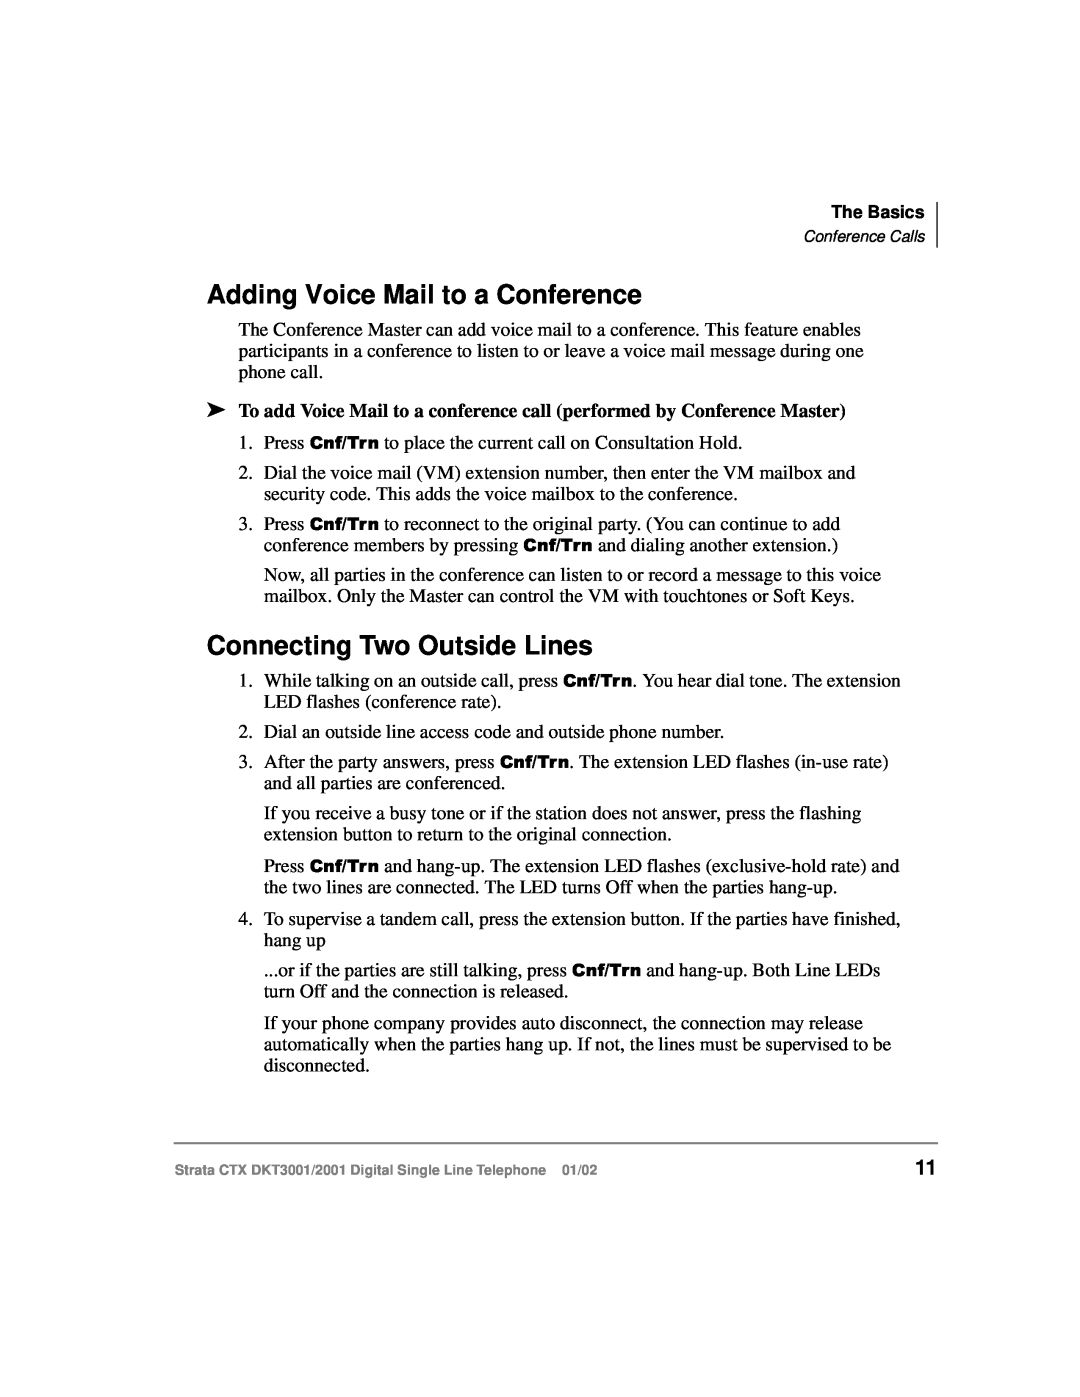 Toshiba 2001, DXT3001 manual Adding Voice Mail to a Conference, Connecting Two Outside Lines 